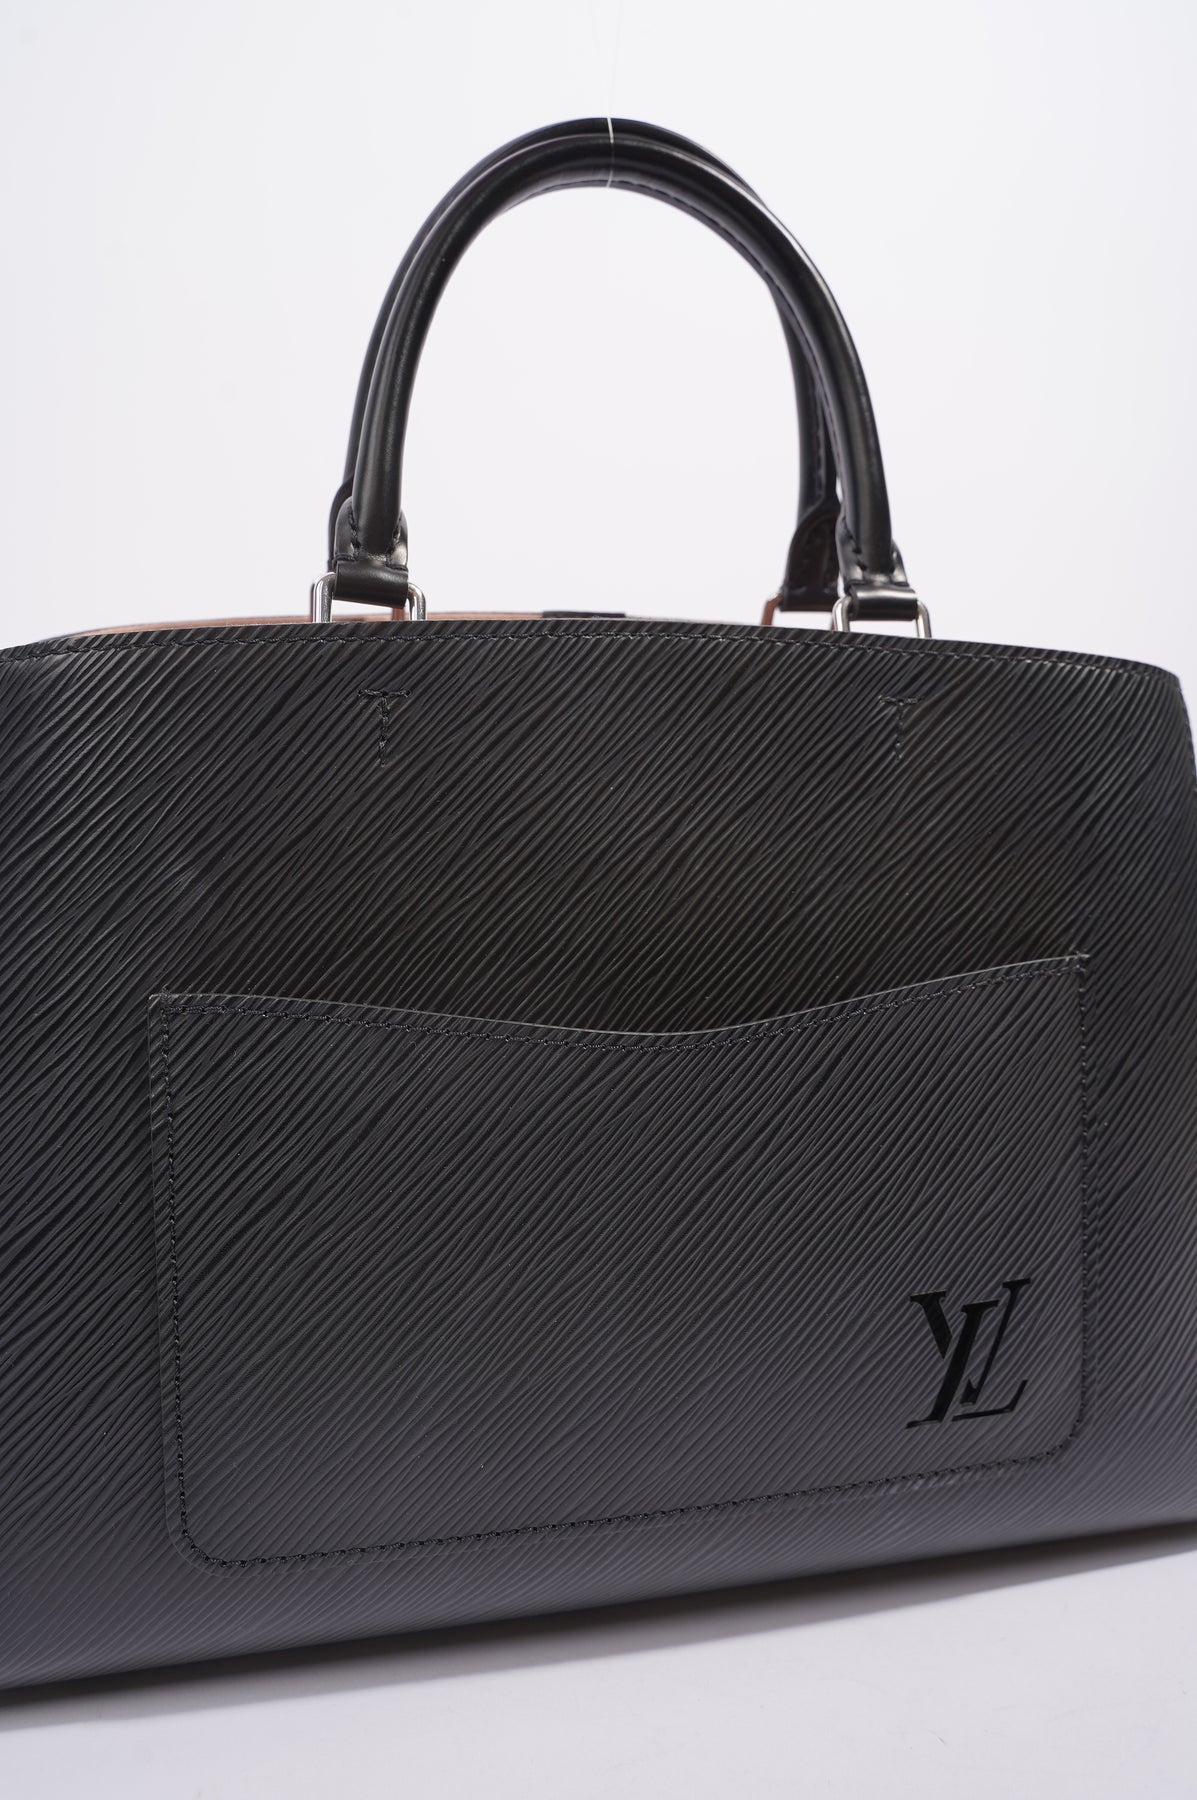 Louis Vuitton Womens Marelle Tote Bag Black Epi Leather MM – Luxe Collective